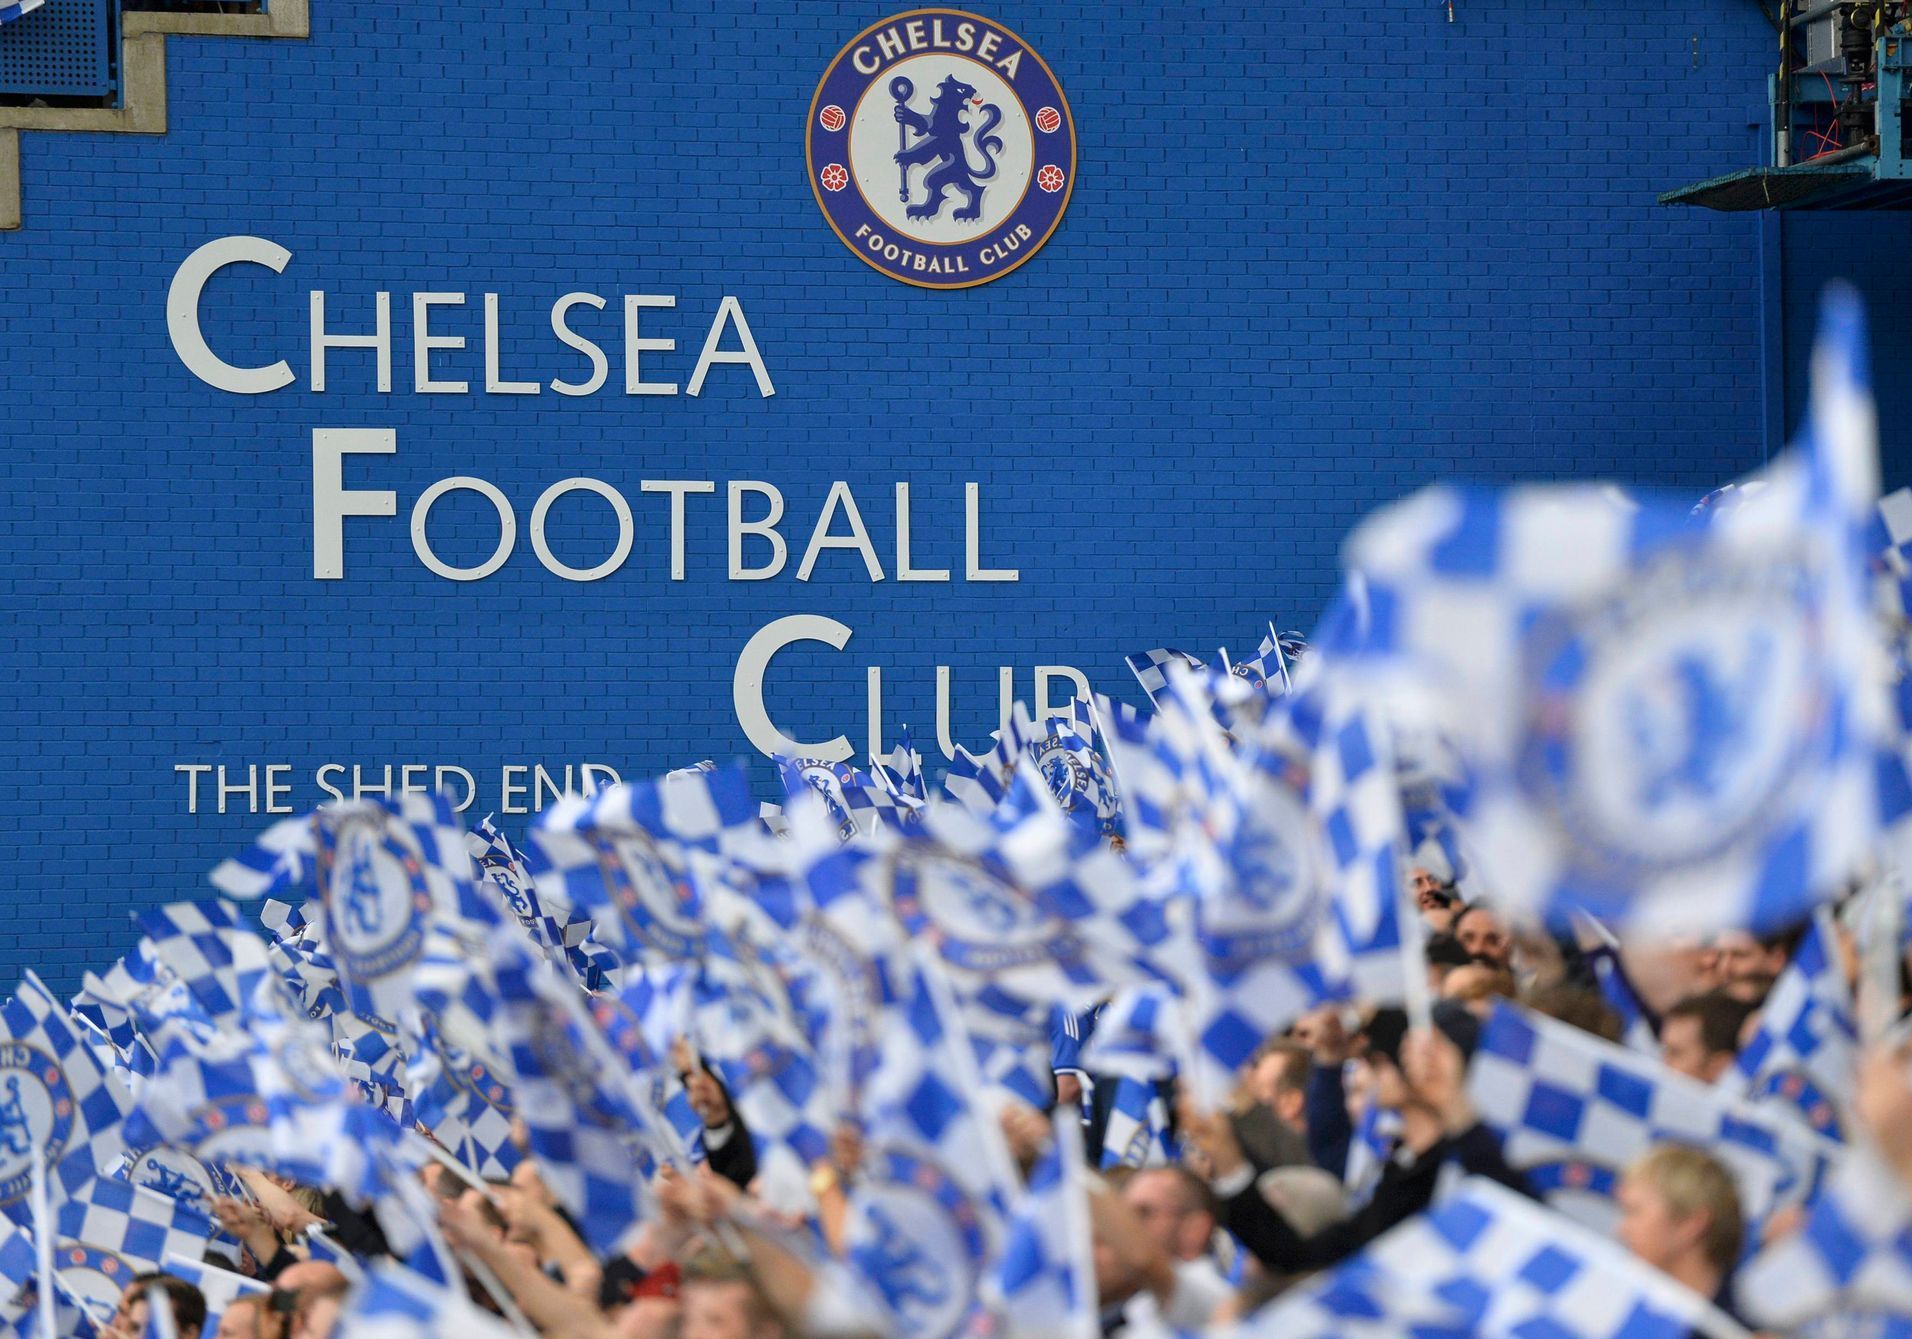 Chelsea's supporters cheer their team before the Champions League semi-final second leg soccer match against Atletico Madrid at Stamford Bridge stadium in London